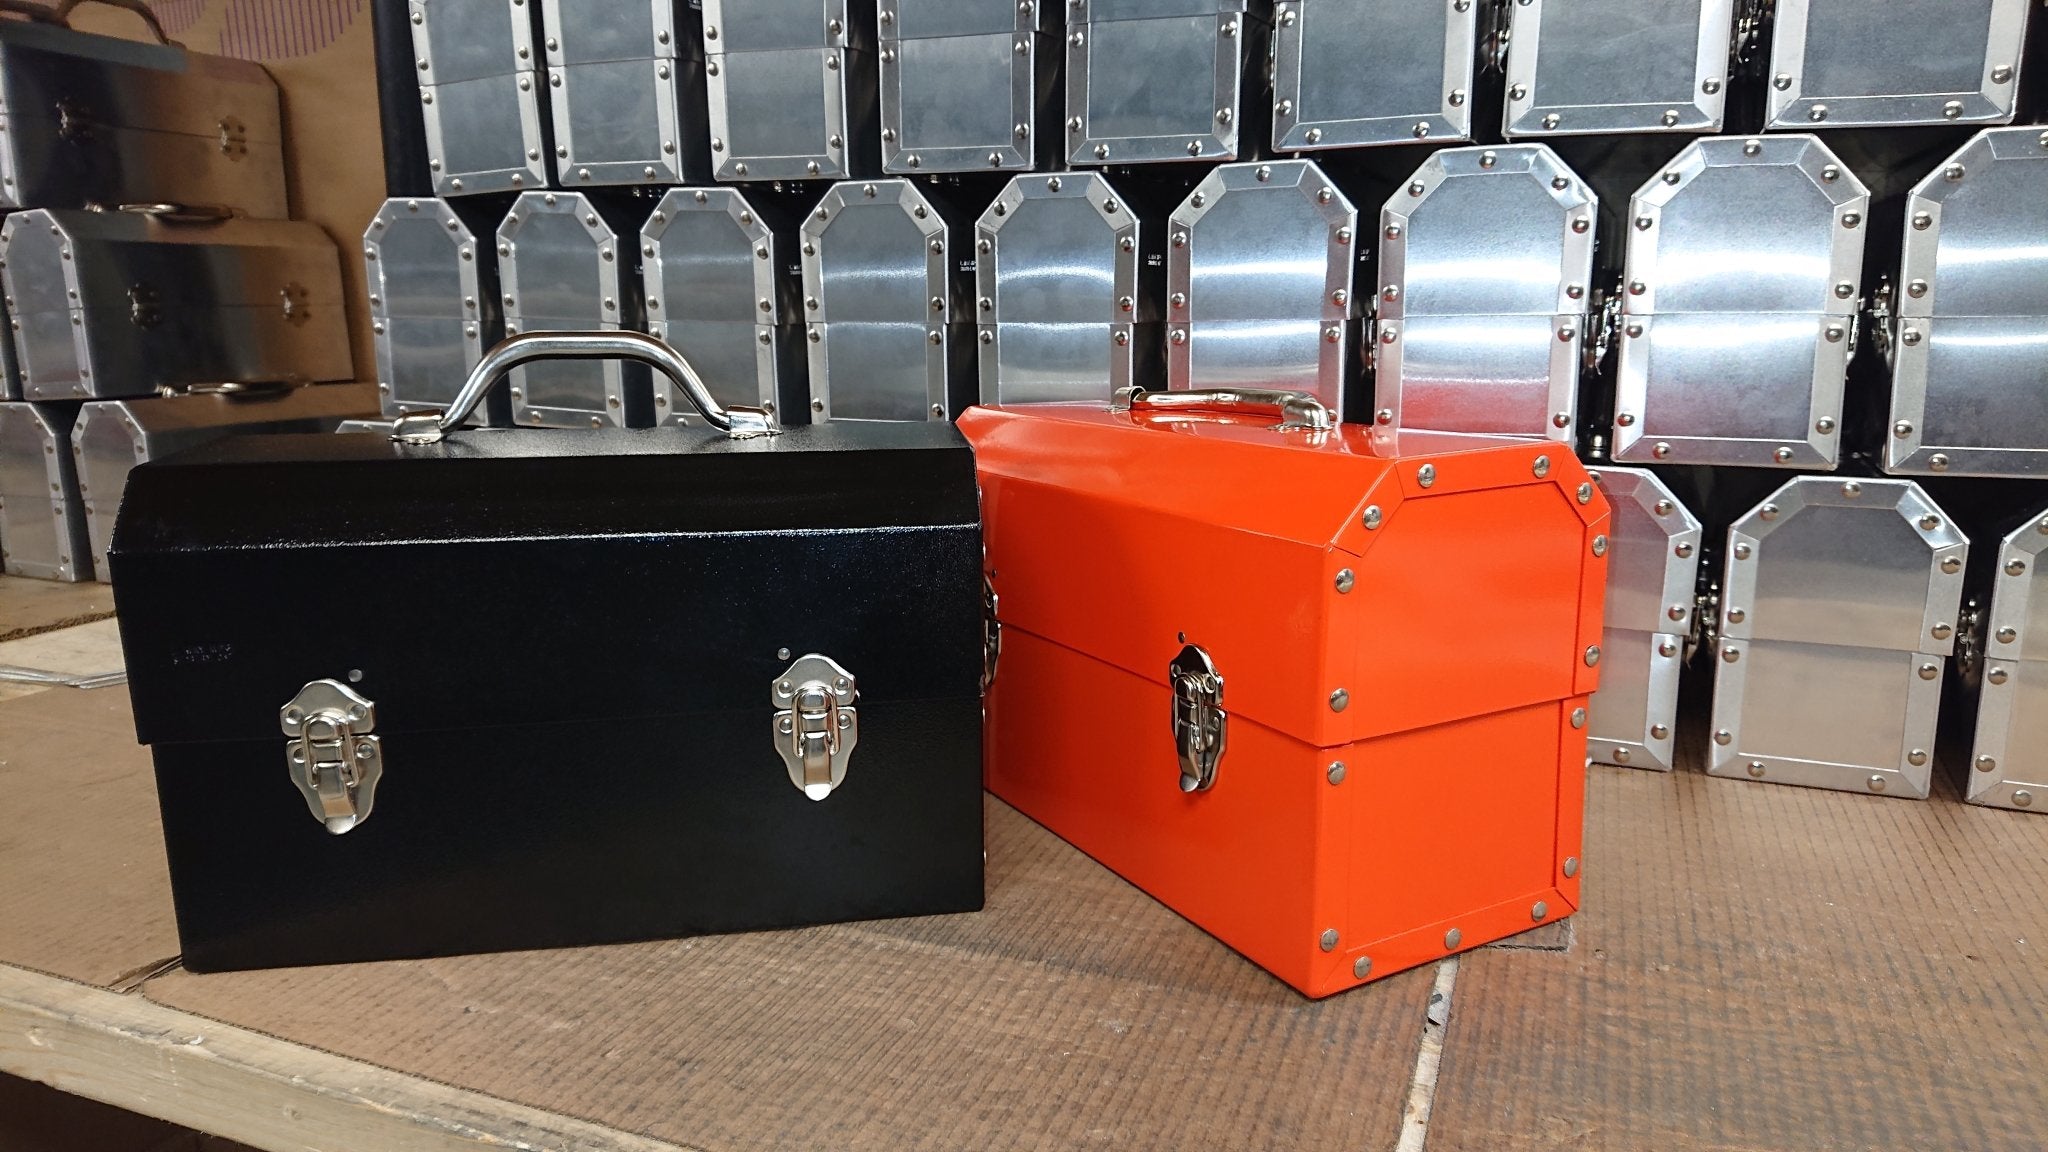 black hammered lunchbox with an orange safety metal lunchbox from L. May